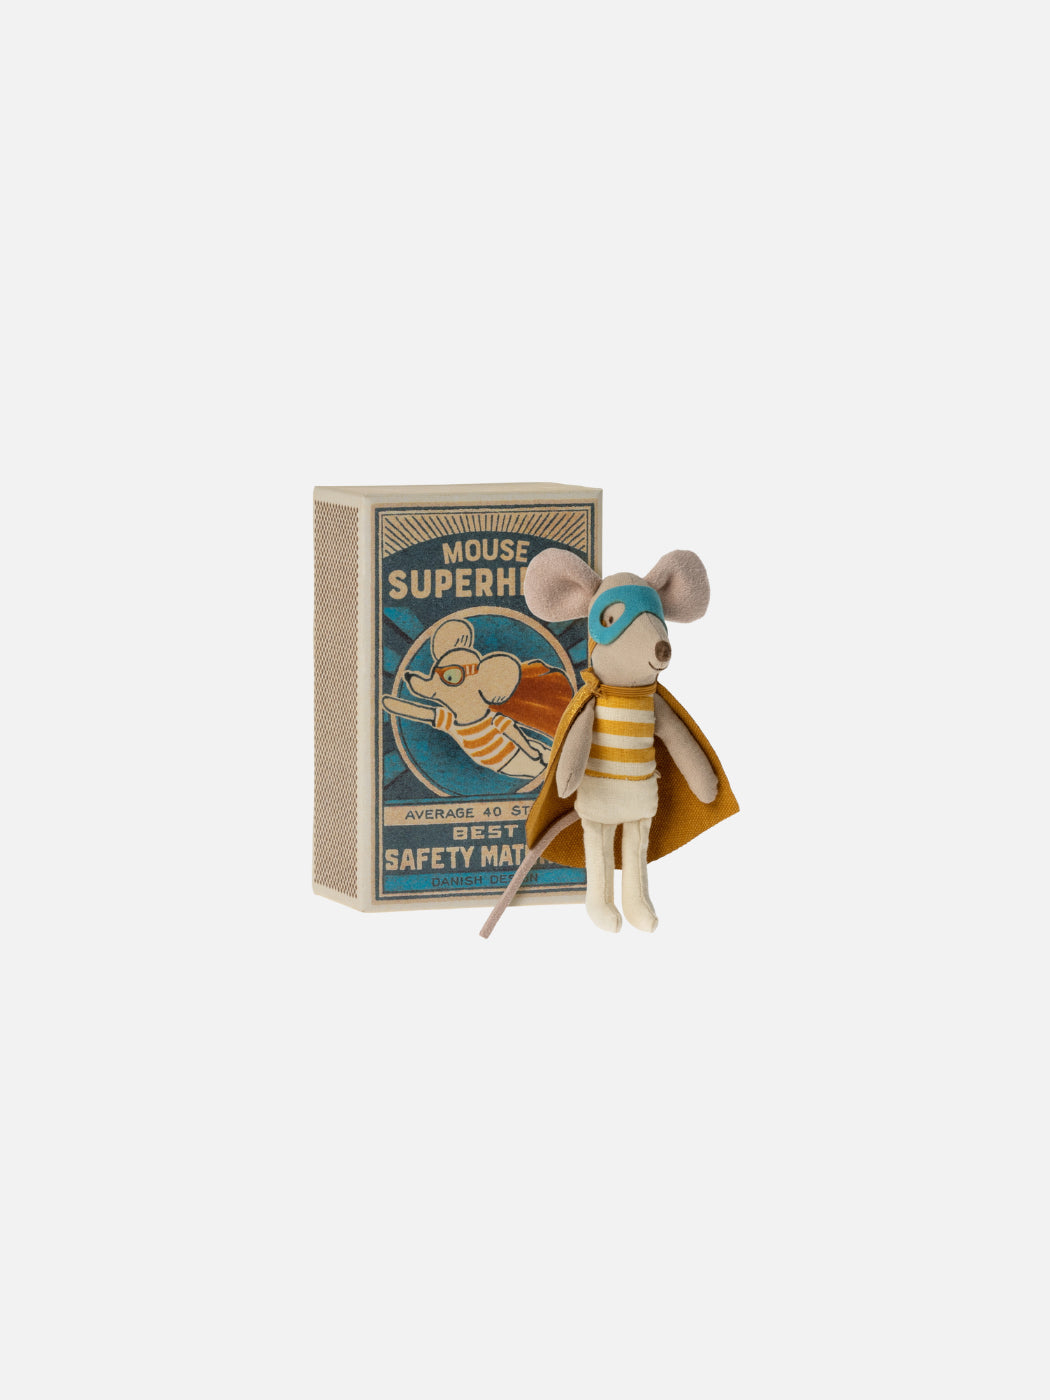 Superhero Mouse in Matchbox